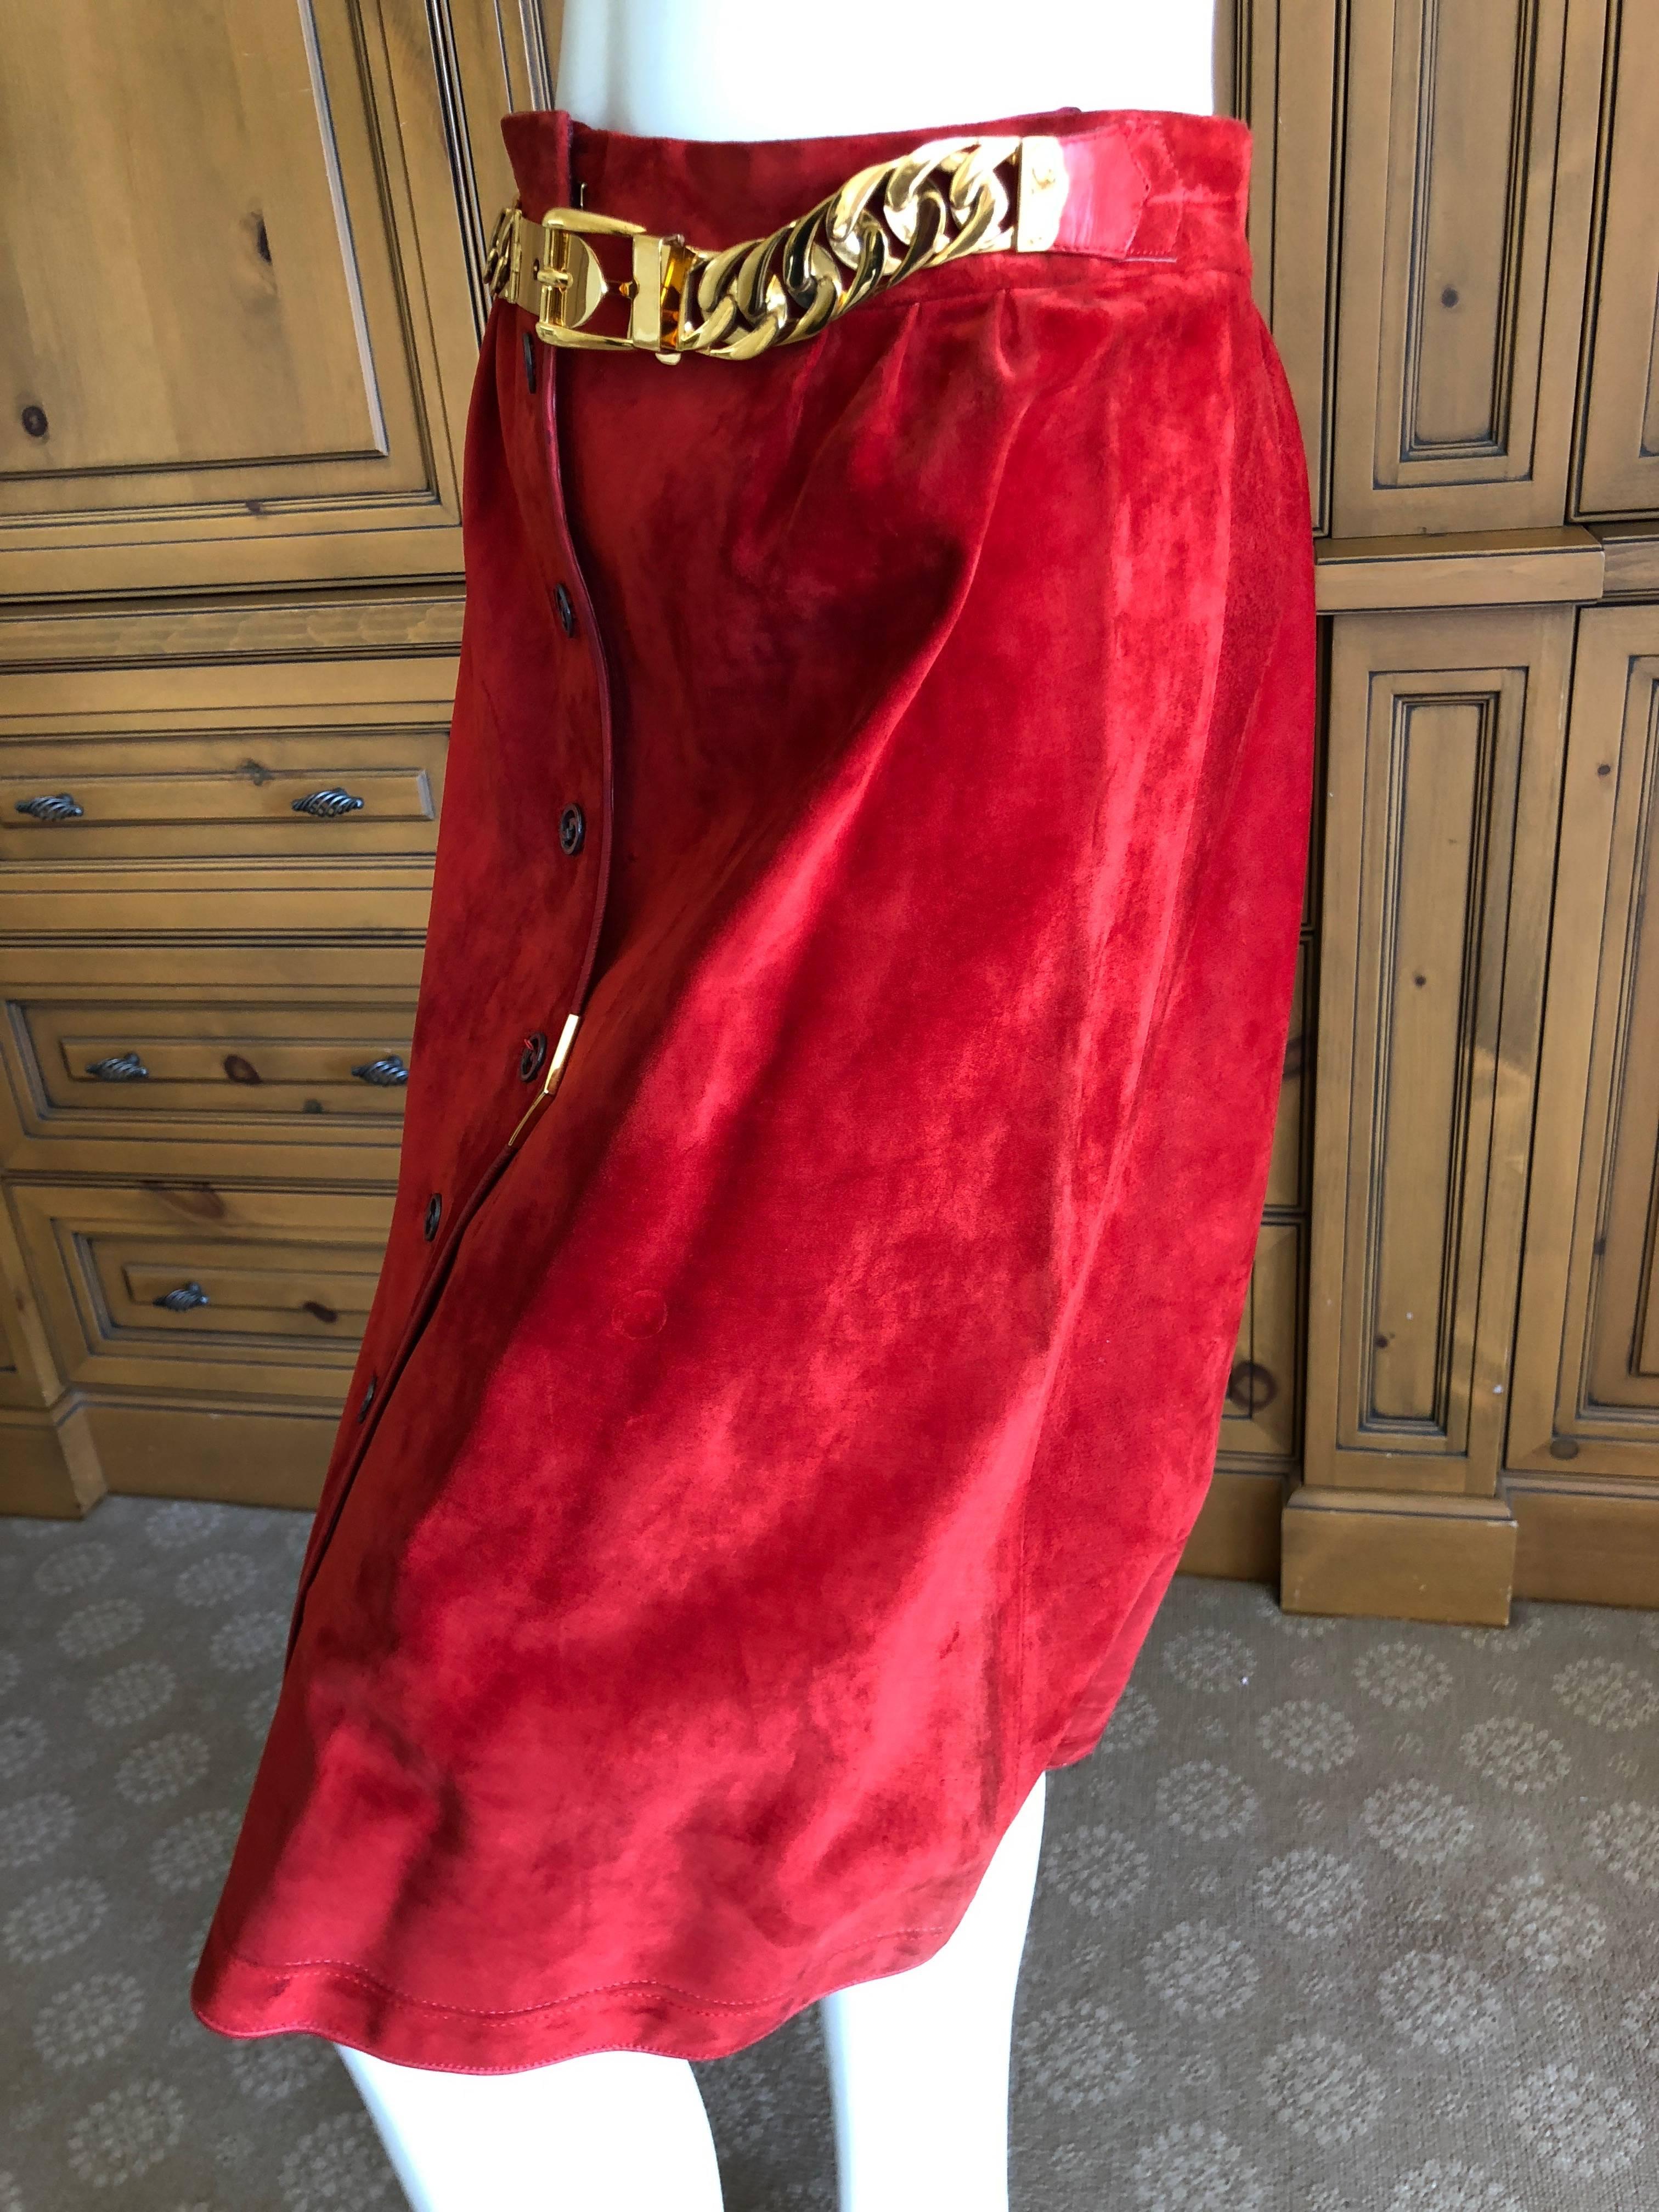  Gucci 1970's Red Leather Trim Suede Skirt with Chain Details and Big GG Buttons For Sale 1